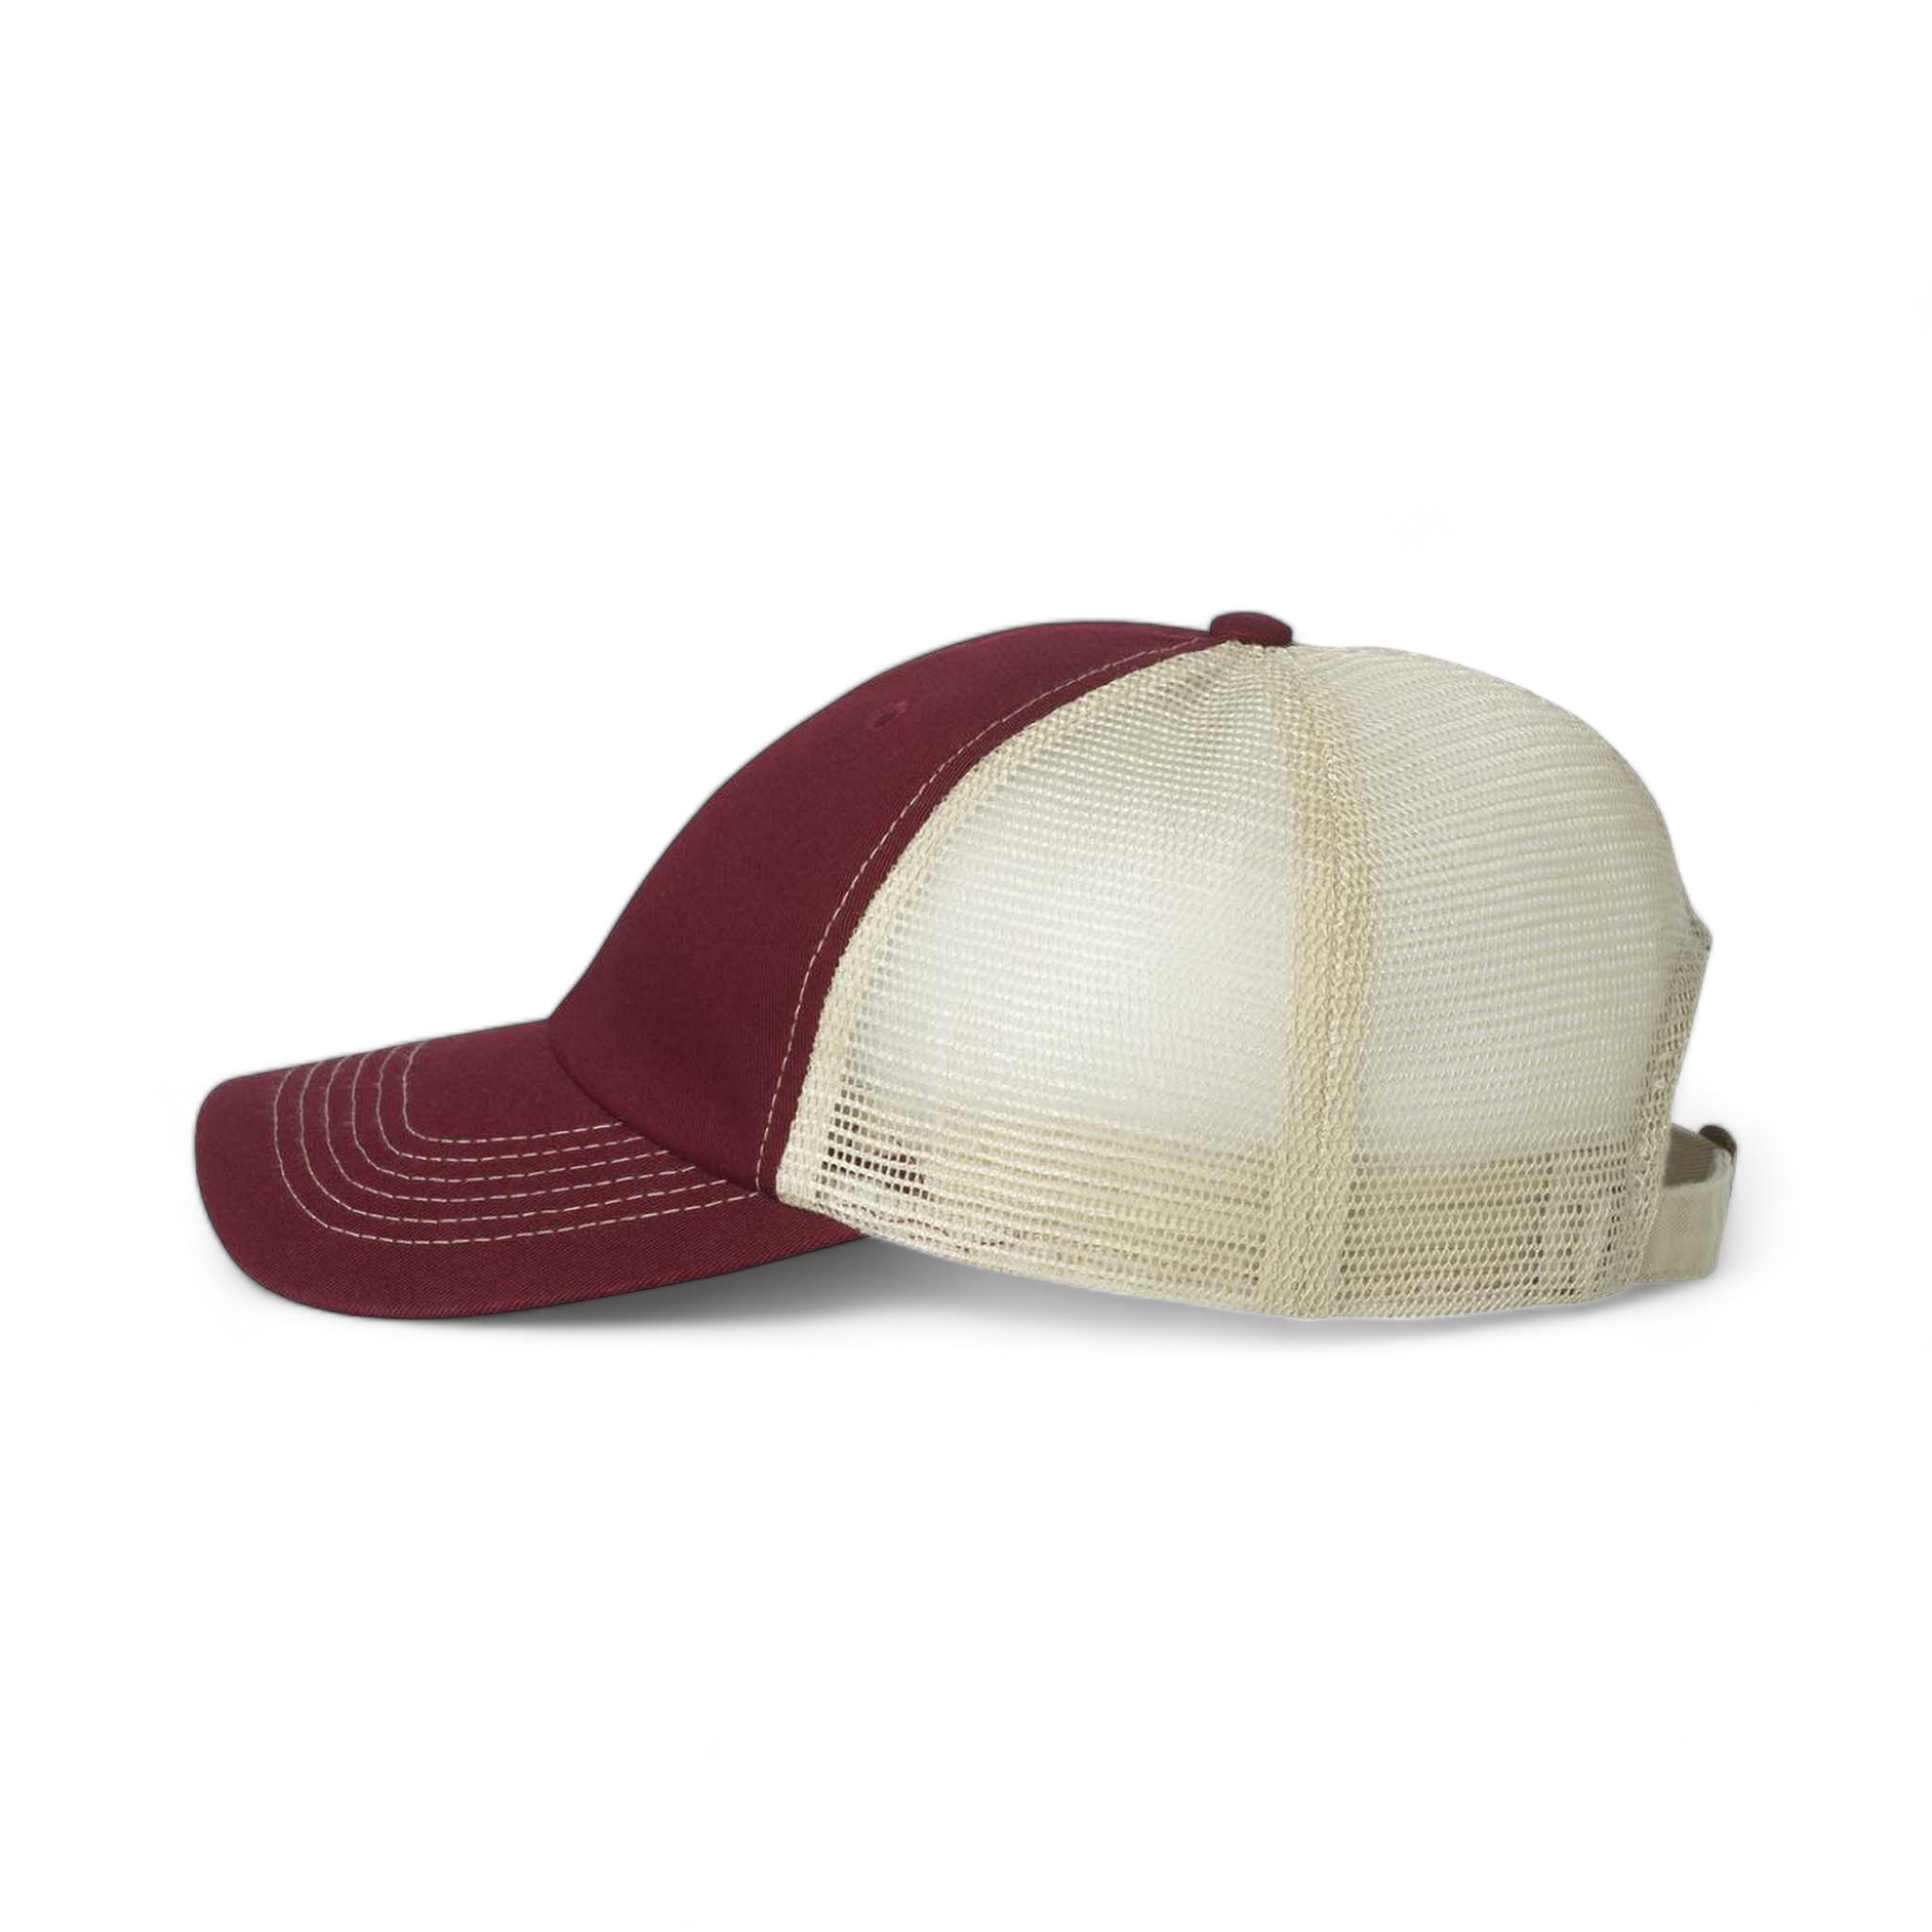 Side view of Sportsman 3100 custom hat in maroon and stone